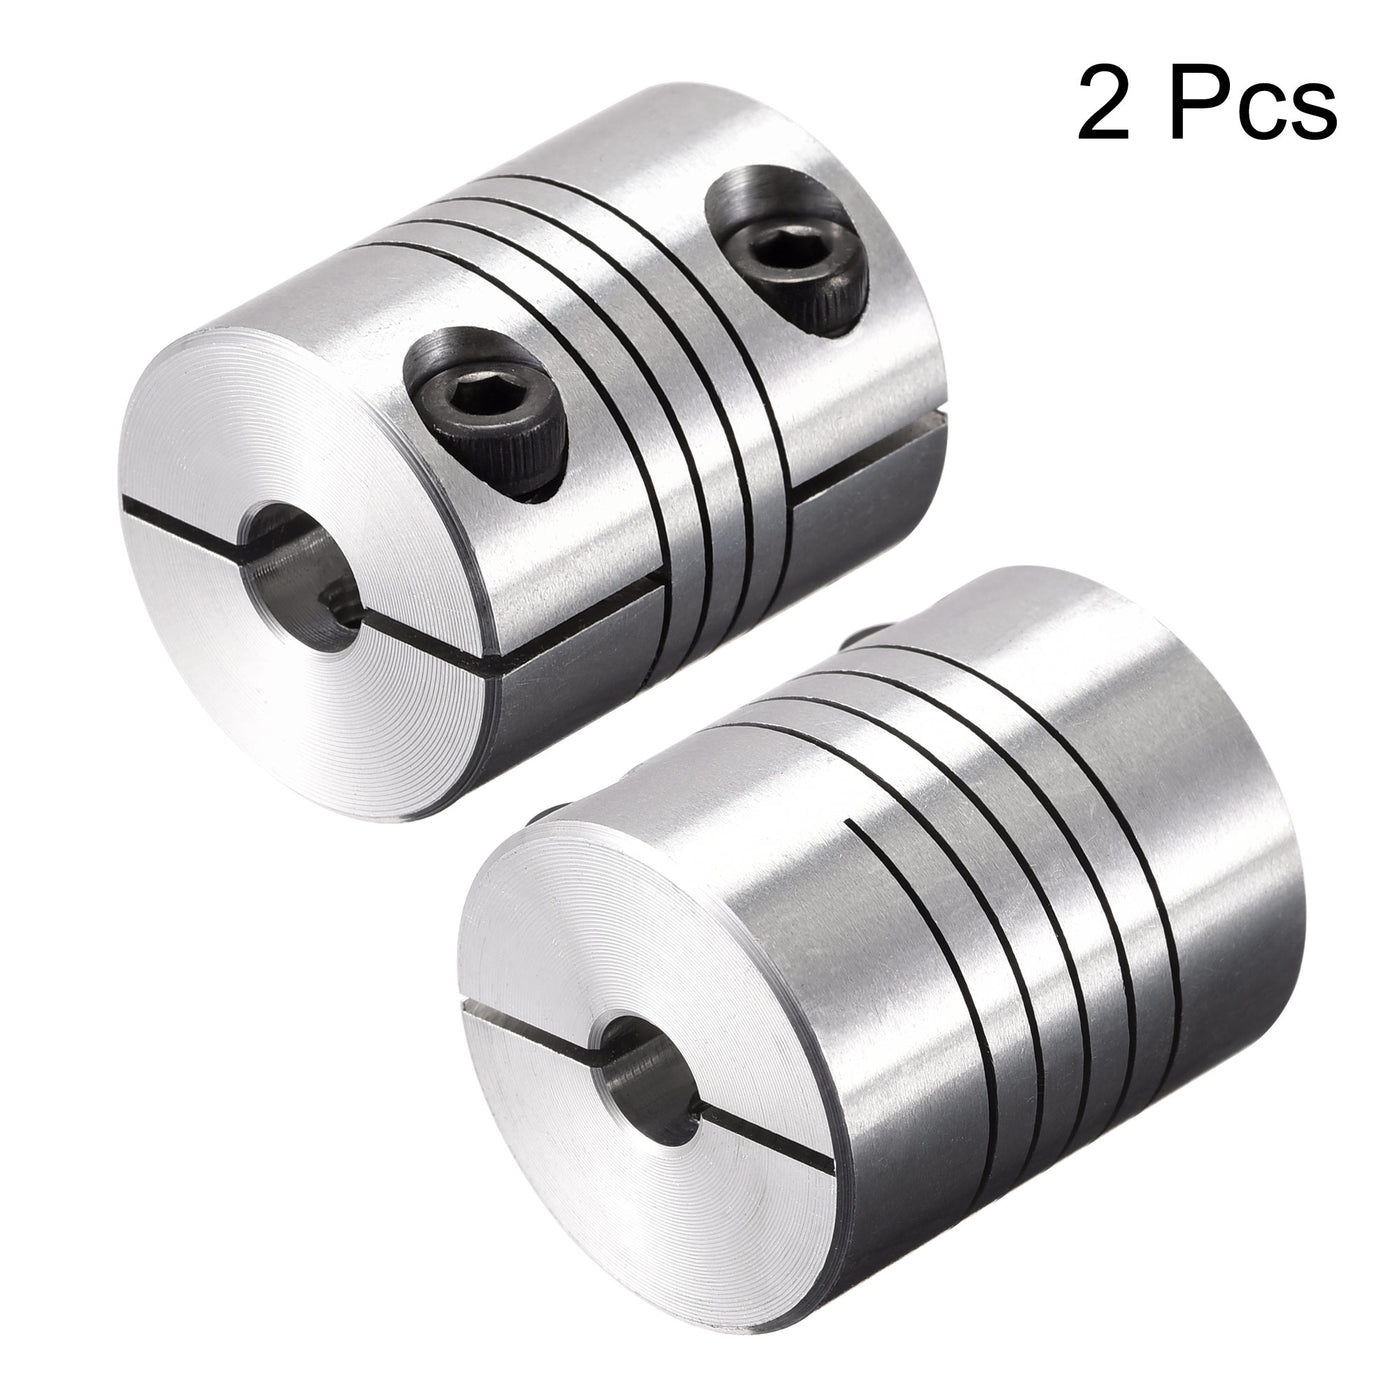 uxcell Uxcell 2PCS Motor Shaft 6mm to 6.35mm Helical Beam Coupler Coupling 25mm Dia 30mm Long